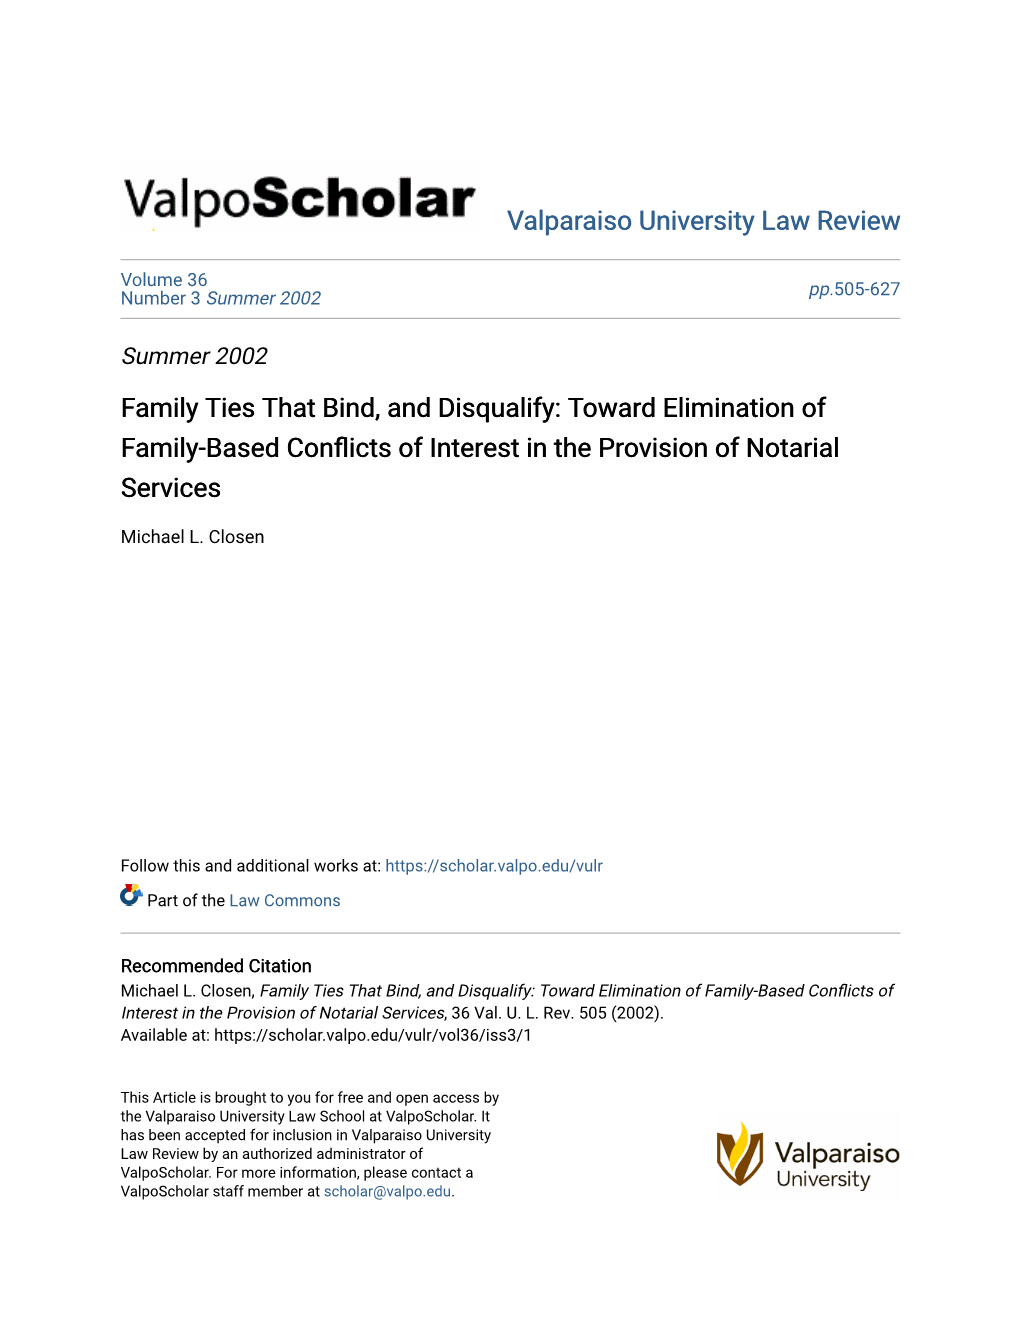 Family Ties That Bind, and Disqualify: Toward Elimination of Family-Based Conflicts of Interest in the Provision of Notarial Services